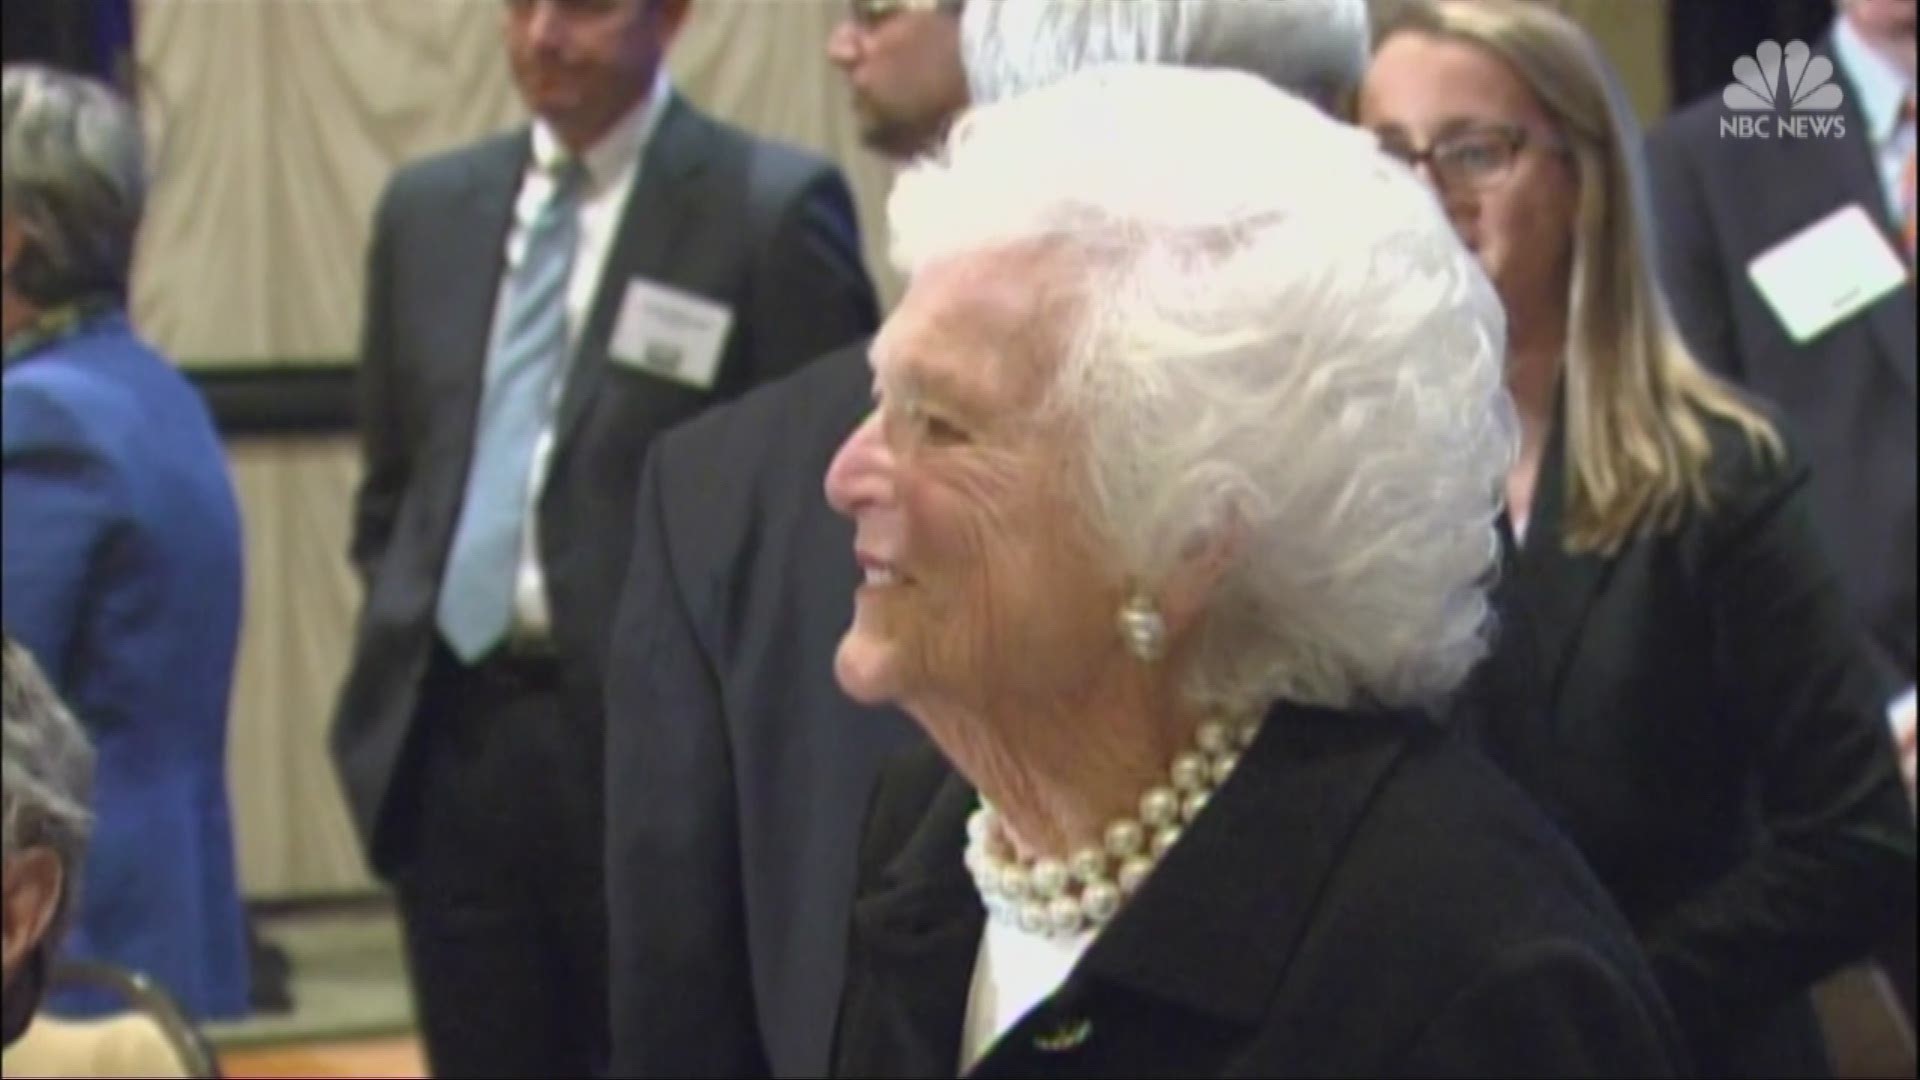 Former First Lady Barbara Bush, wife of President George H.W. Bush and father of President George W. Bush, has died at the age of 92. NBC's Jay Gray reports.